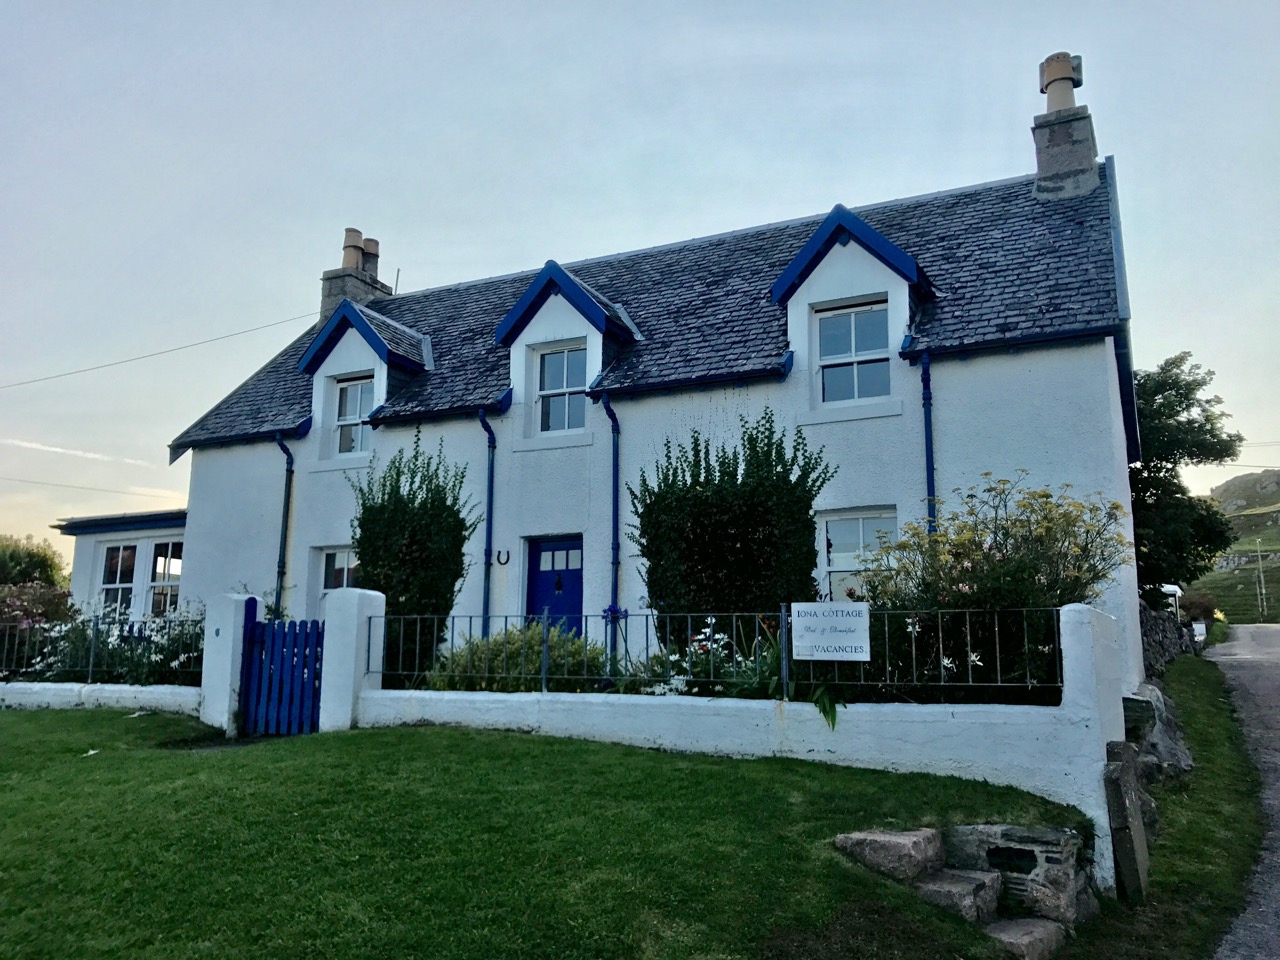 Our B&B - Iona Cottage